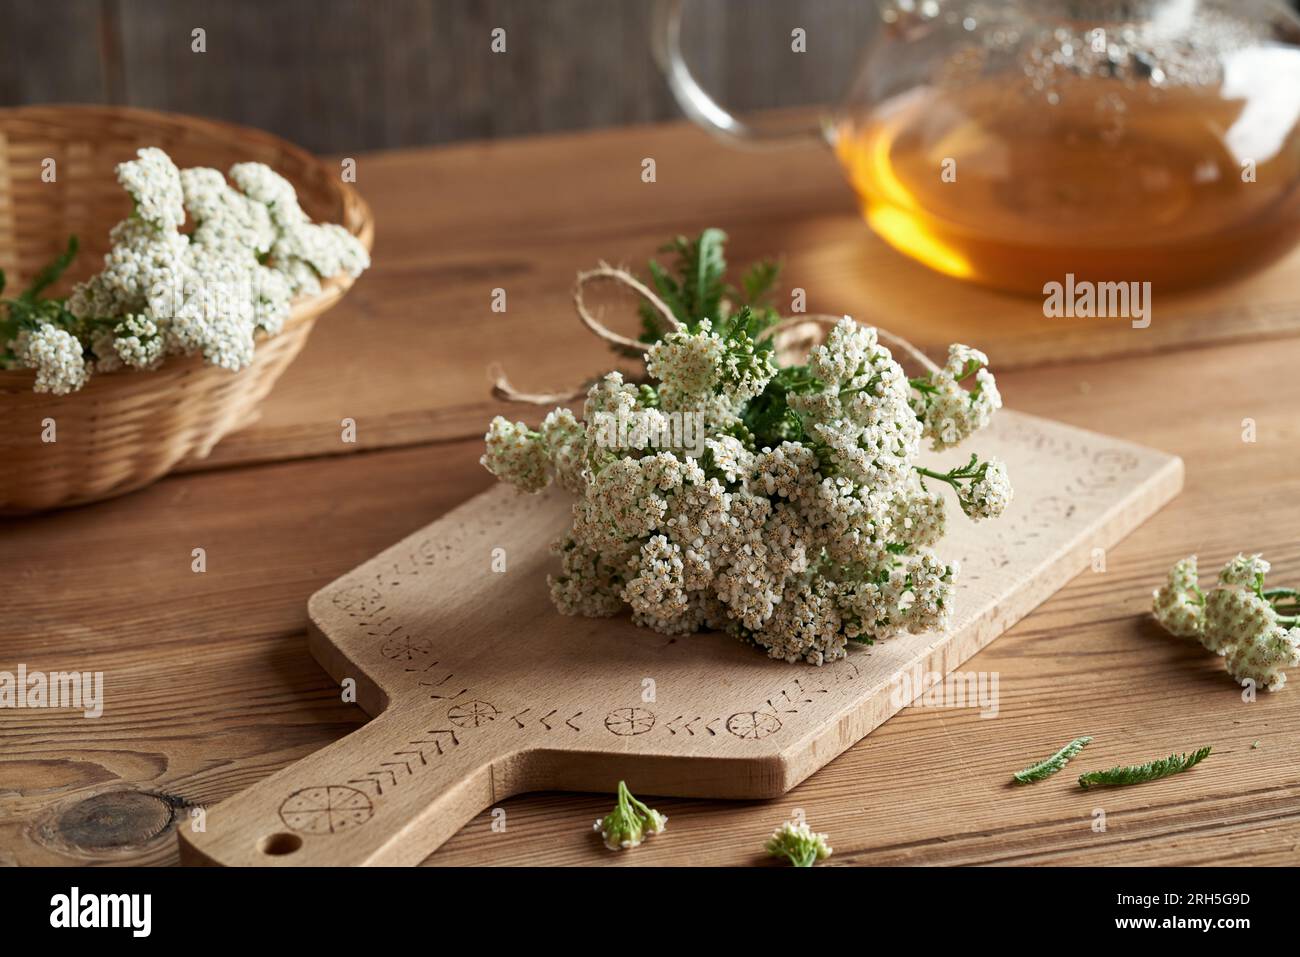 Blooming yarrow herb on a table indoors, with a kettle of herbal tea in the background Stock Photo